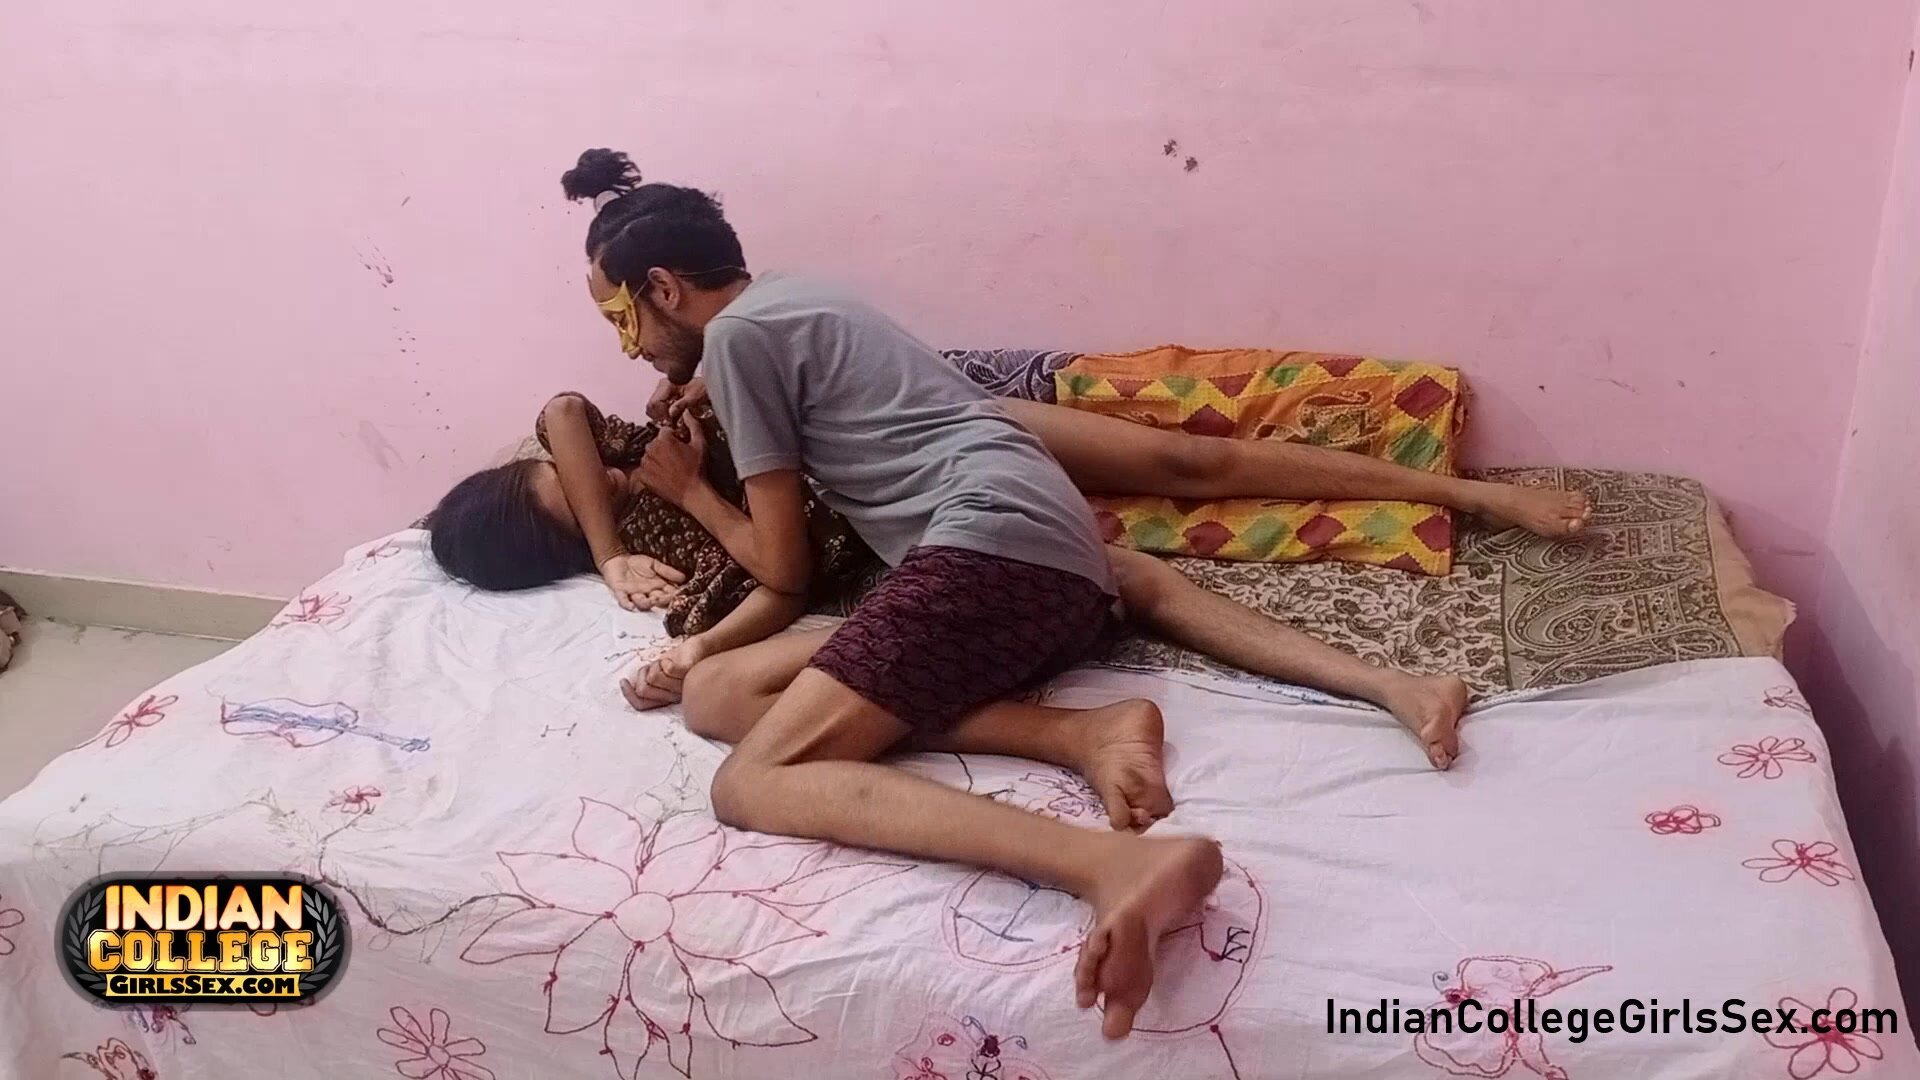 Amateur Indian skinny teen get an anal creampie after a hard desi pussy fucking sex at Fapnado pic pic